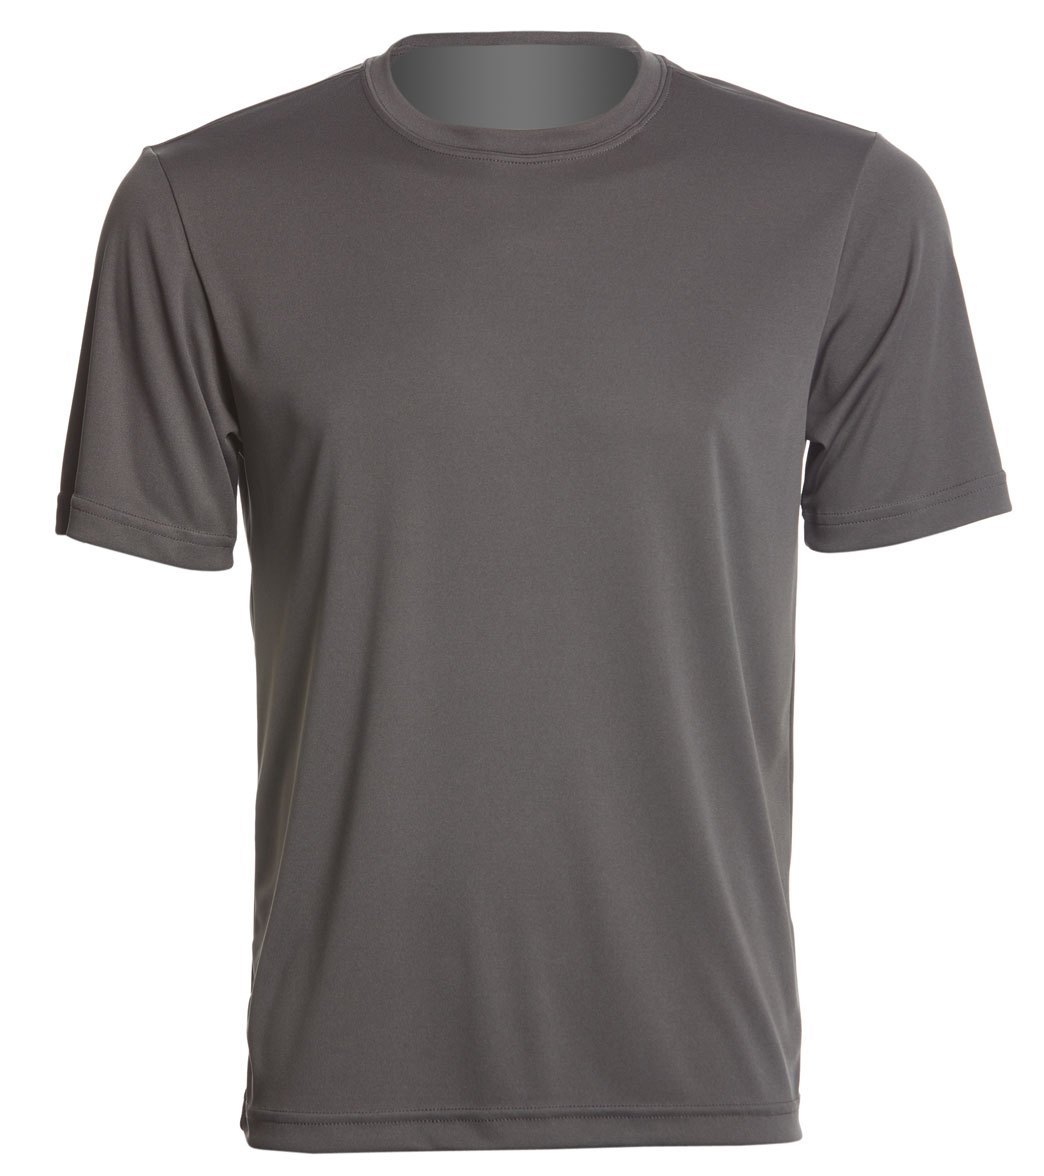 Men's Posicharge Competitortm Tee Shirt - Iron Grey Large Polyester - Swimoutlet.com